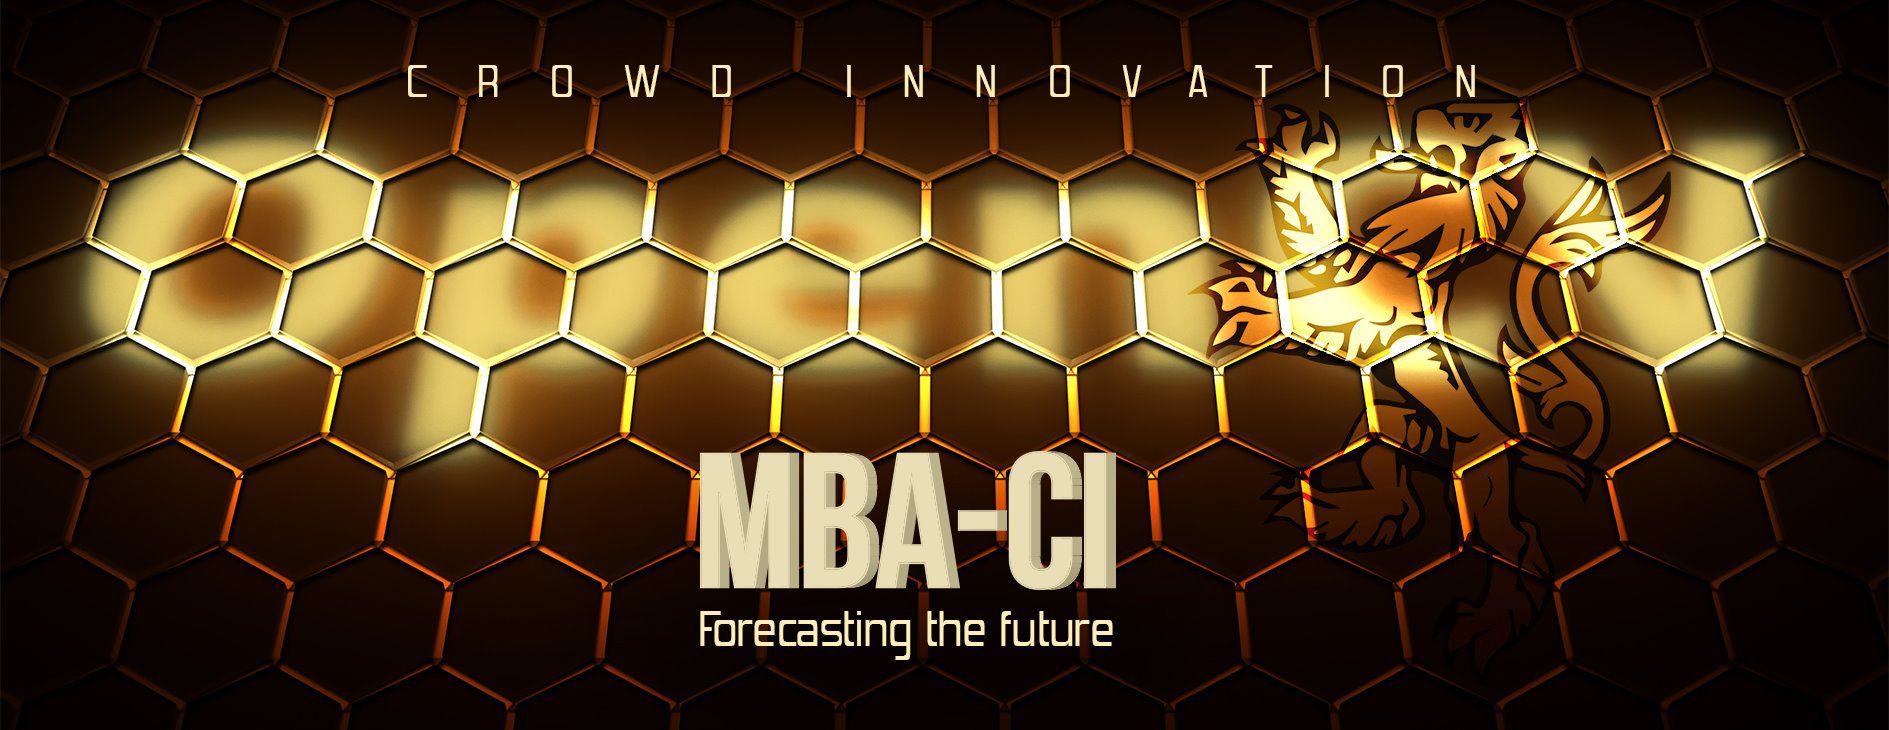 MBA in crowd innovation